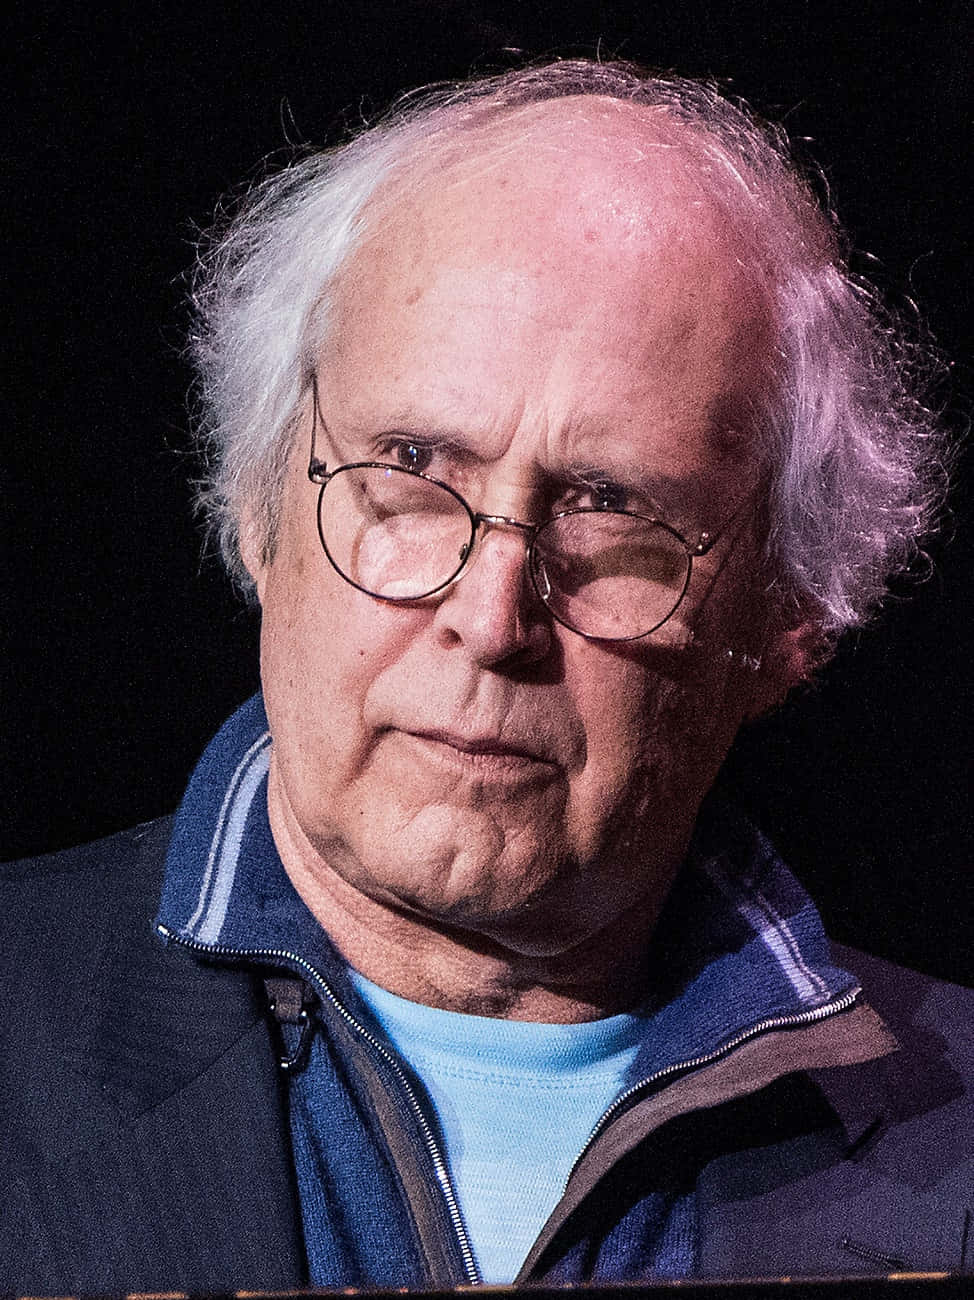 Caption: Legendary Comedian Chevy Chase Wallpaper